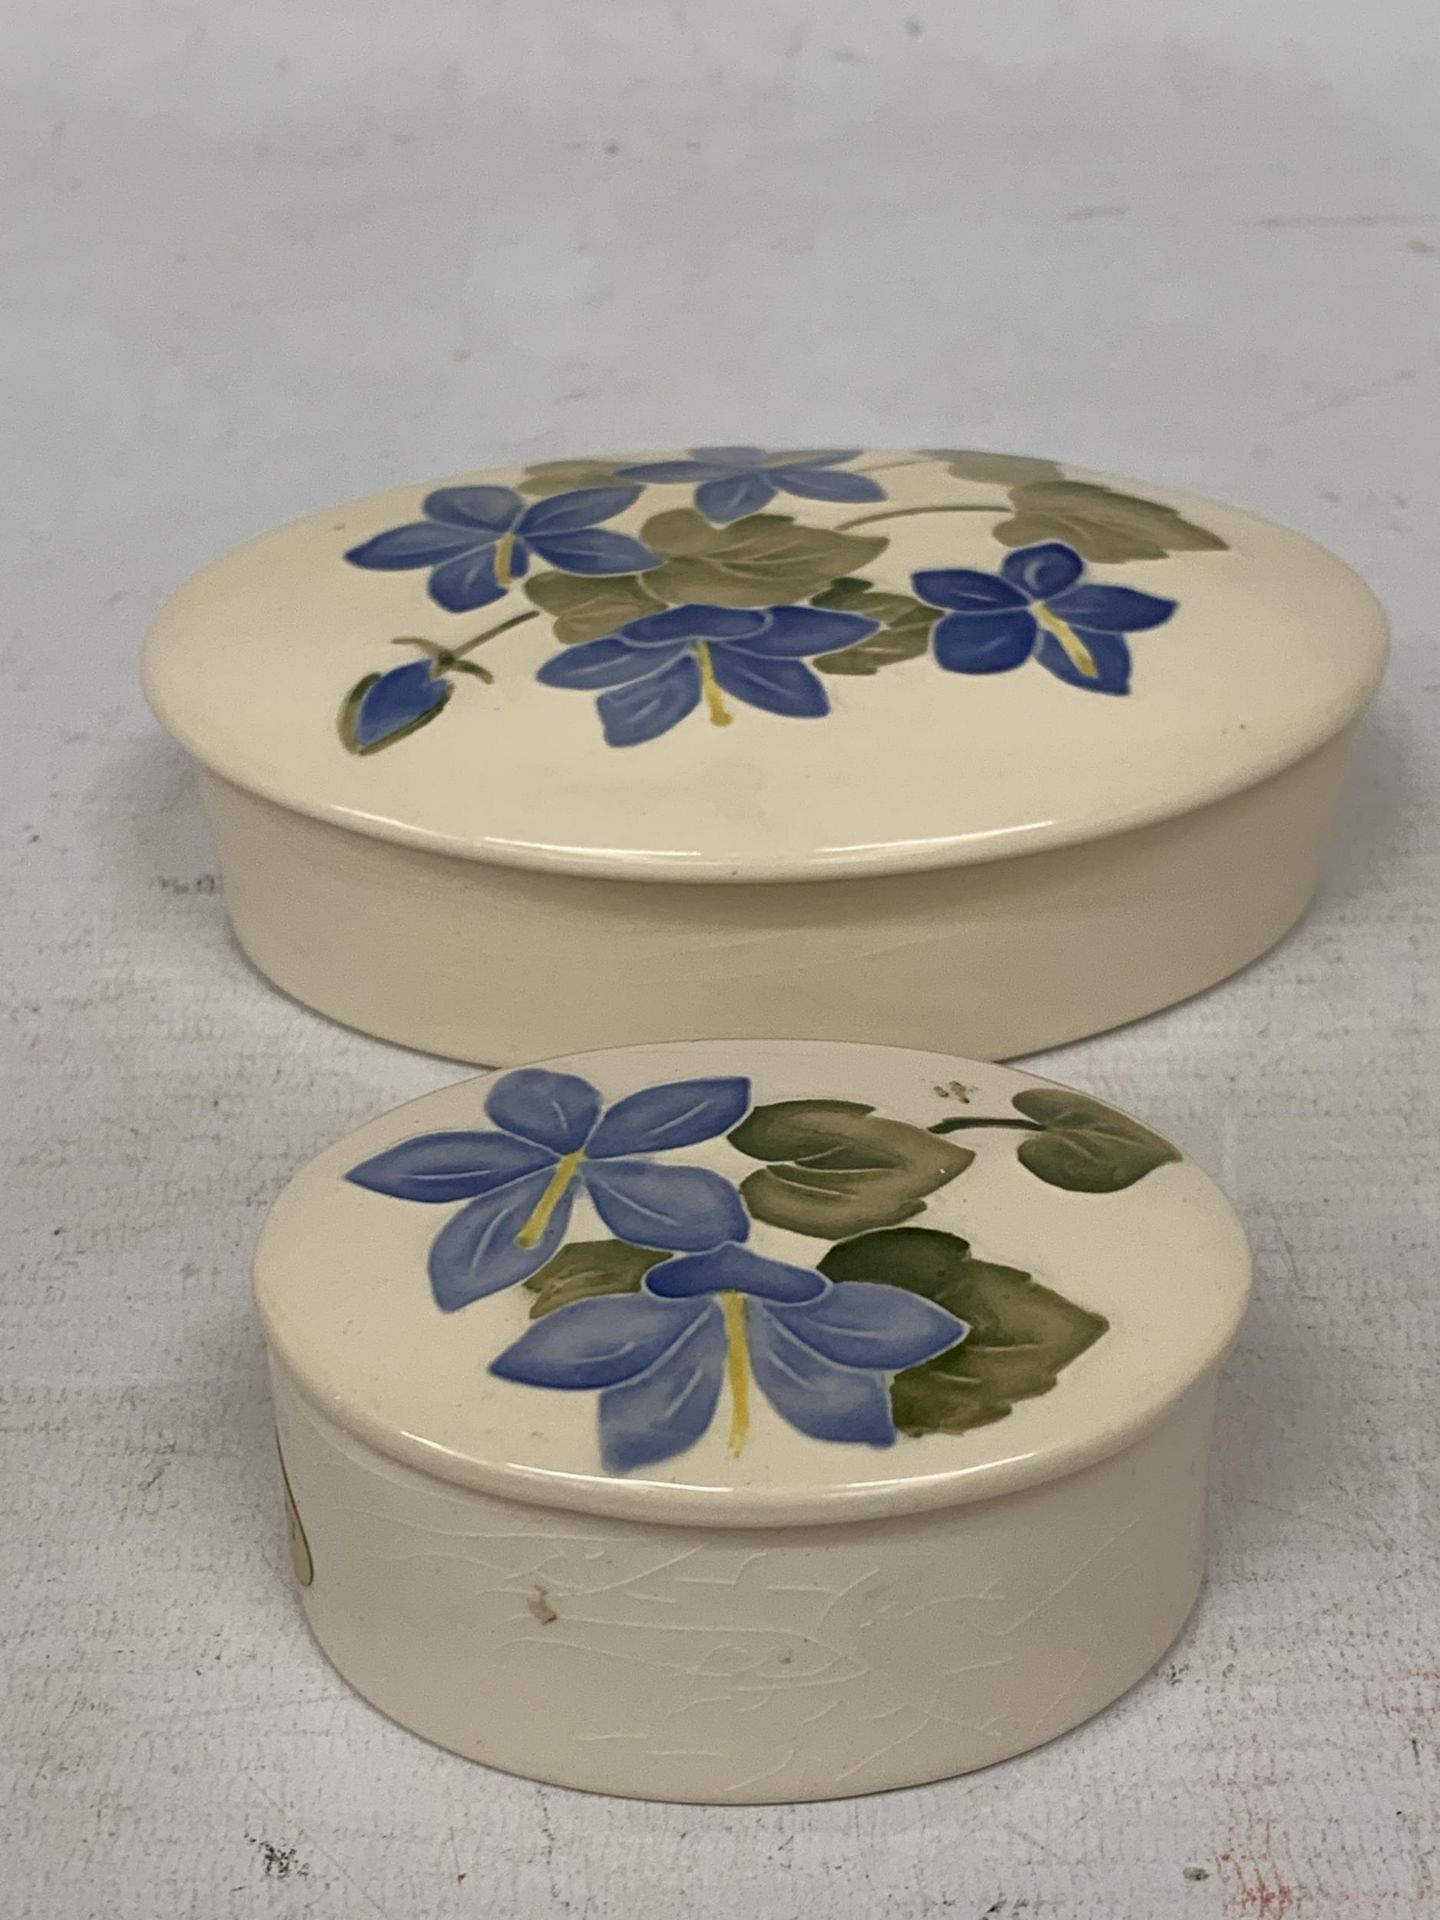 TWO SMALL UNMARKED MOORCROFT CAMPANULA OVAL TRINKET BOXES